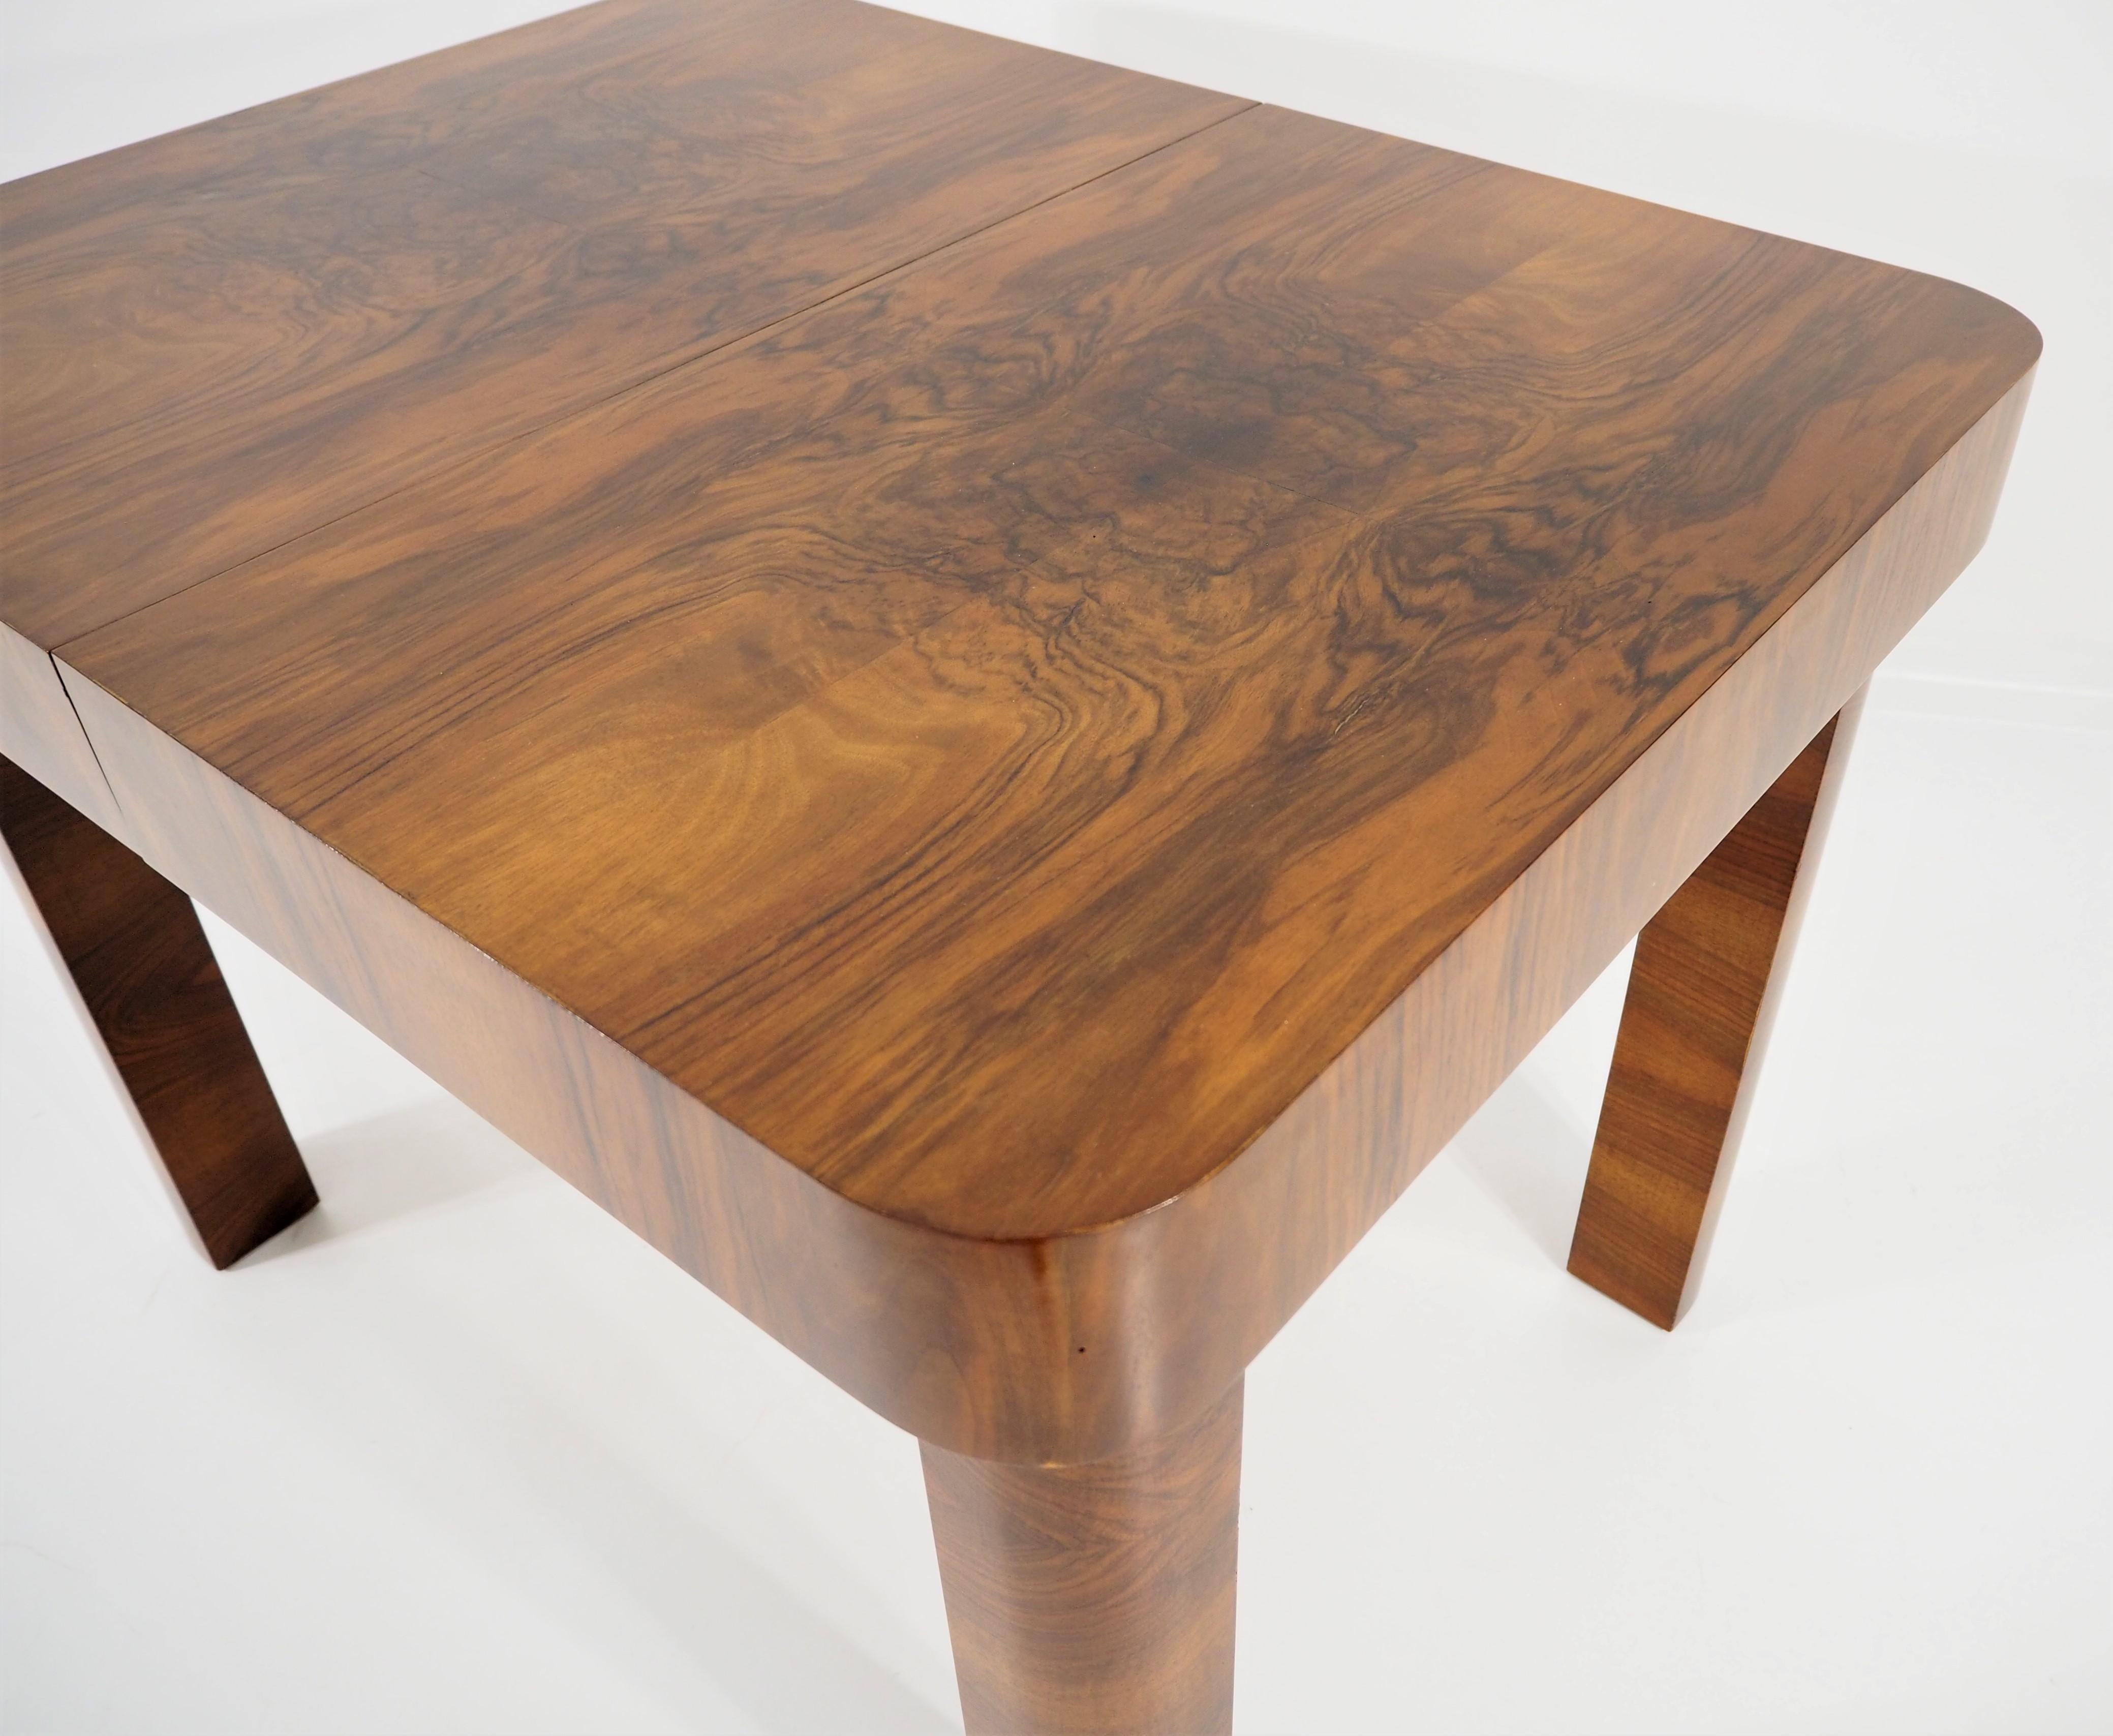 Nutwood Art Deco Dining Table, circa 1940s